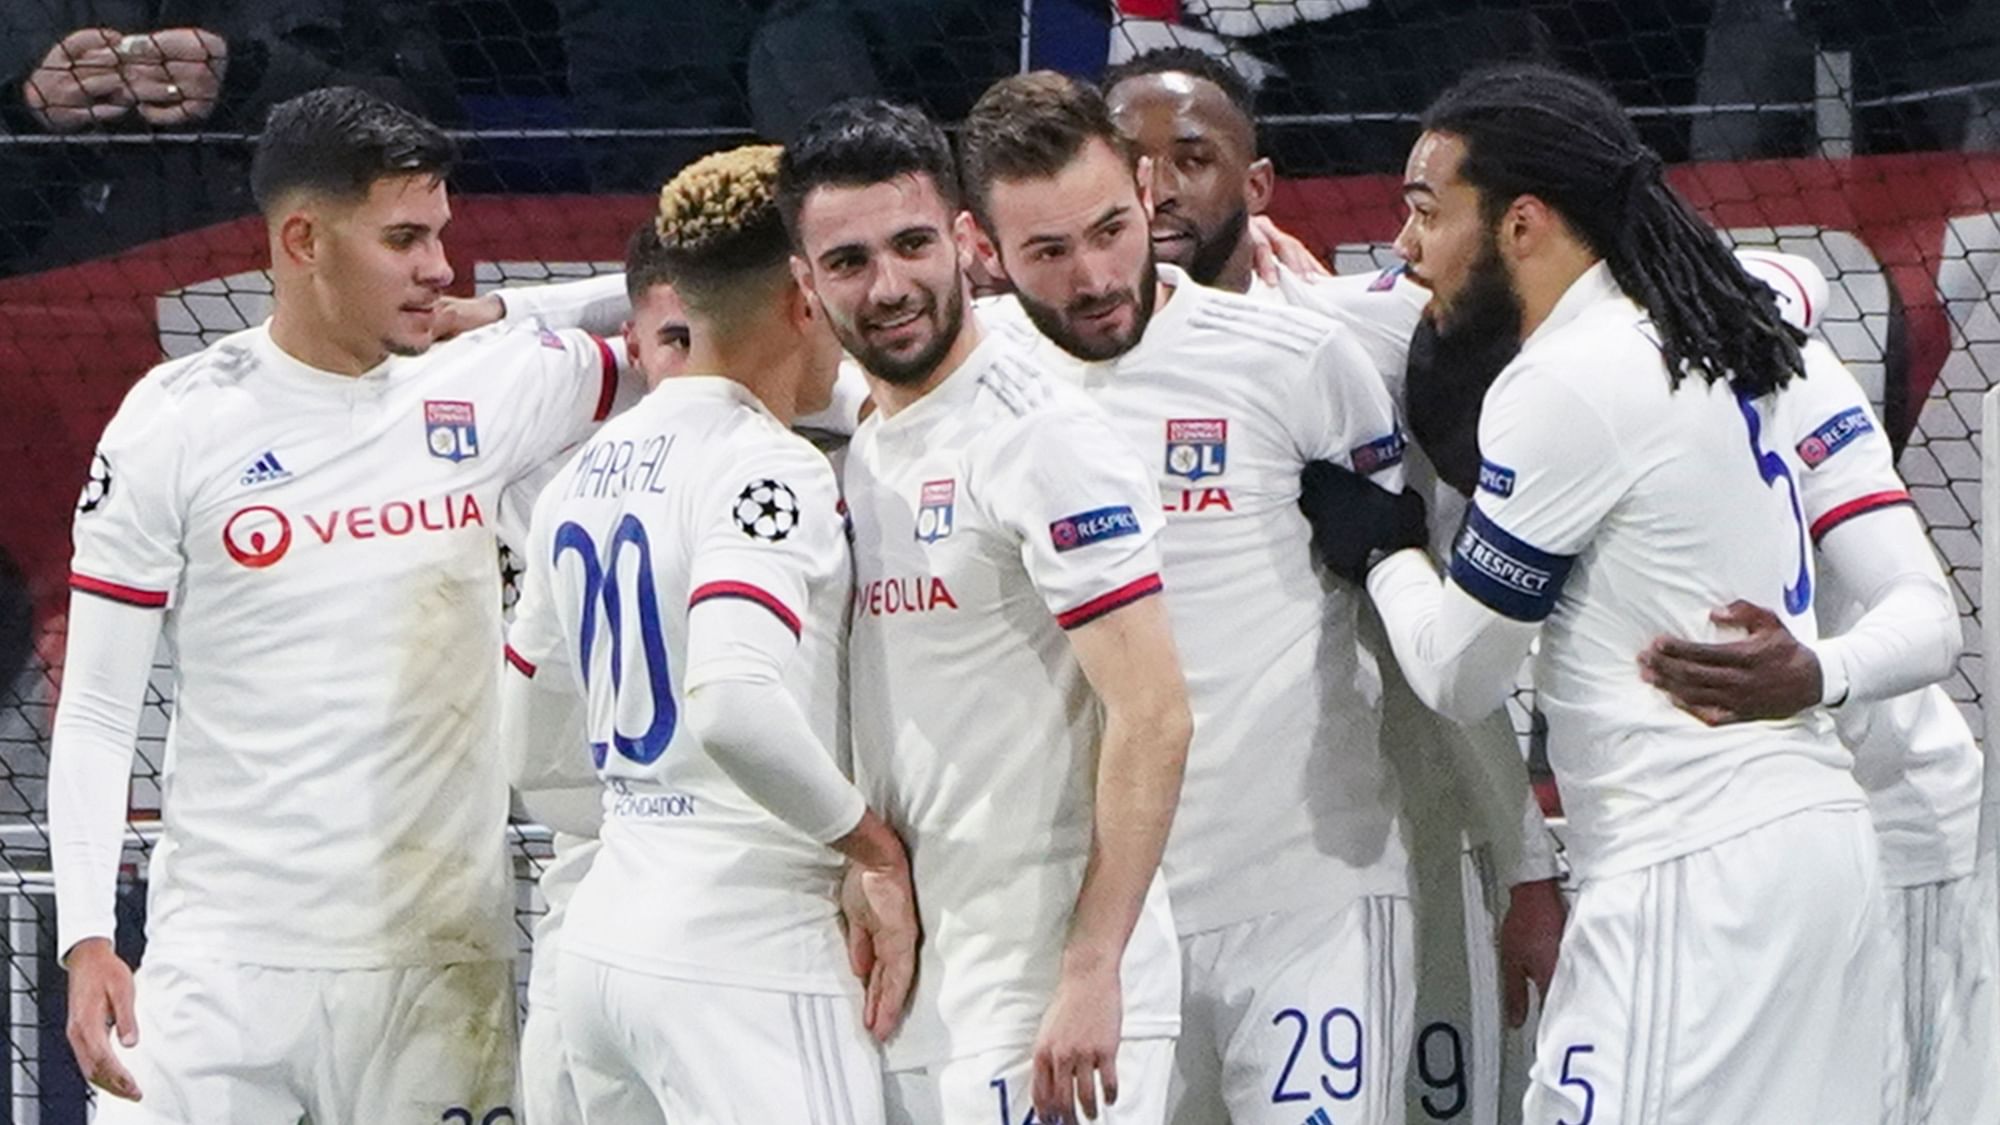 Midfielder Tousart netted in the 31st minute on Wednesday to give Lyon a lead.